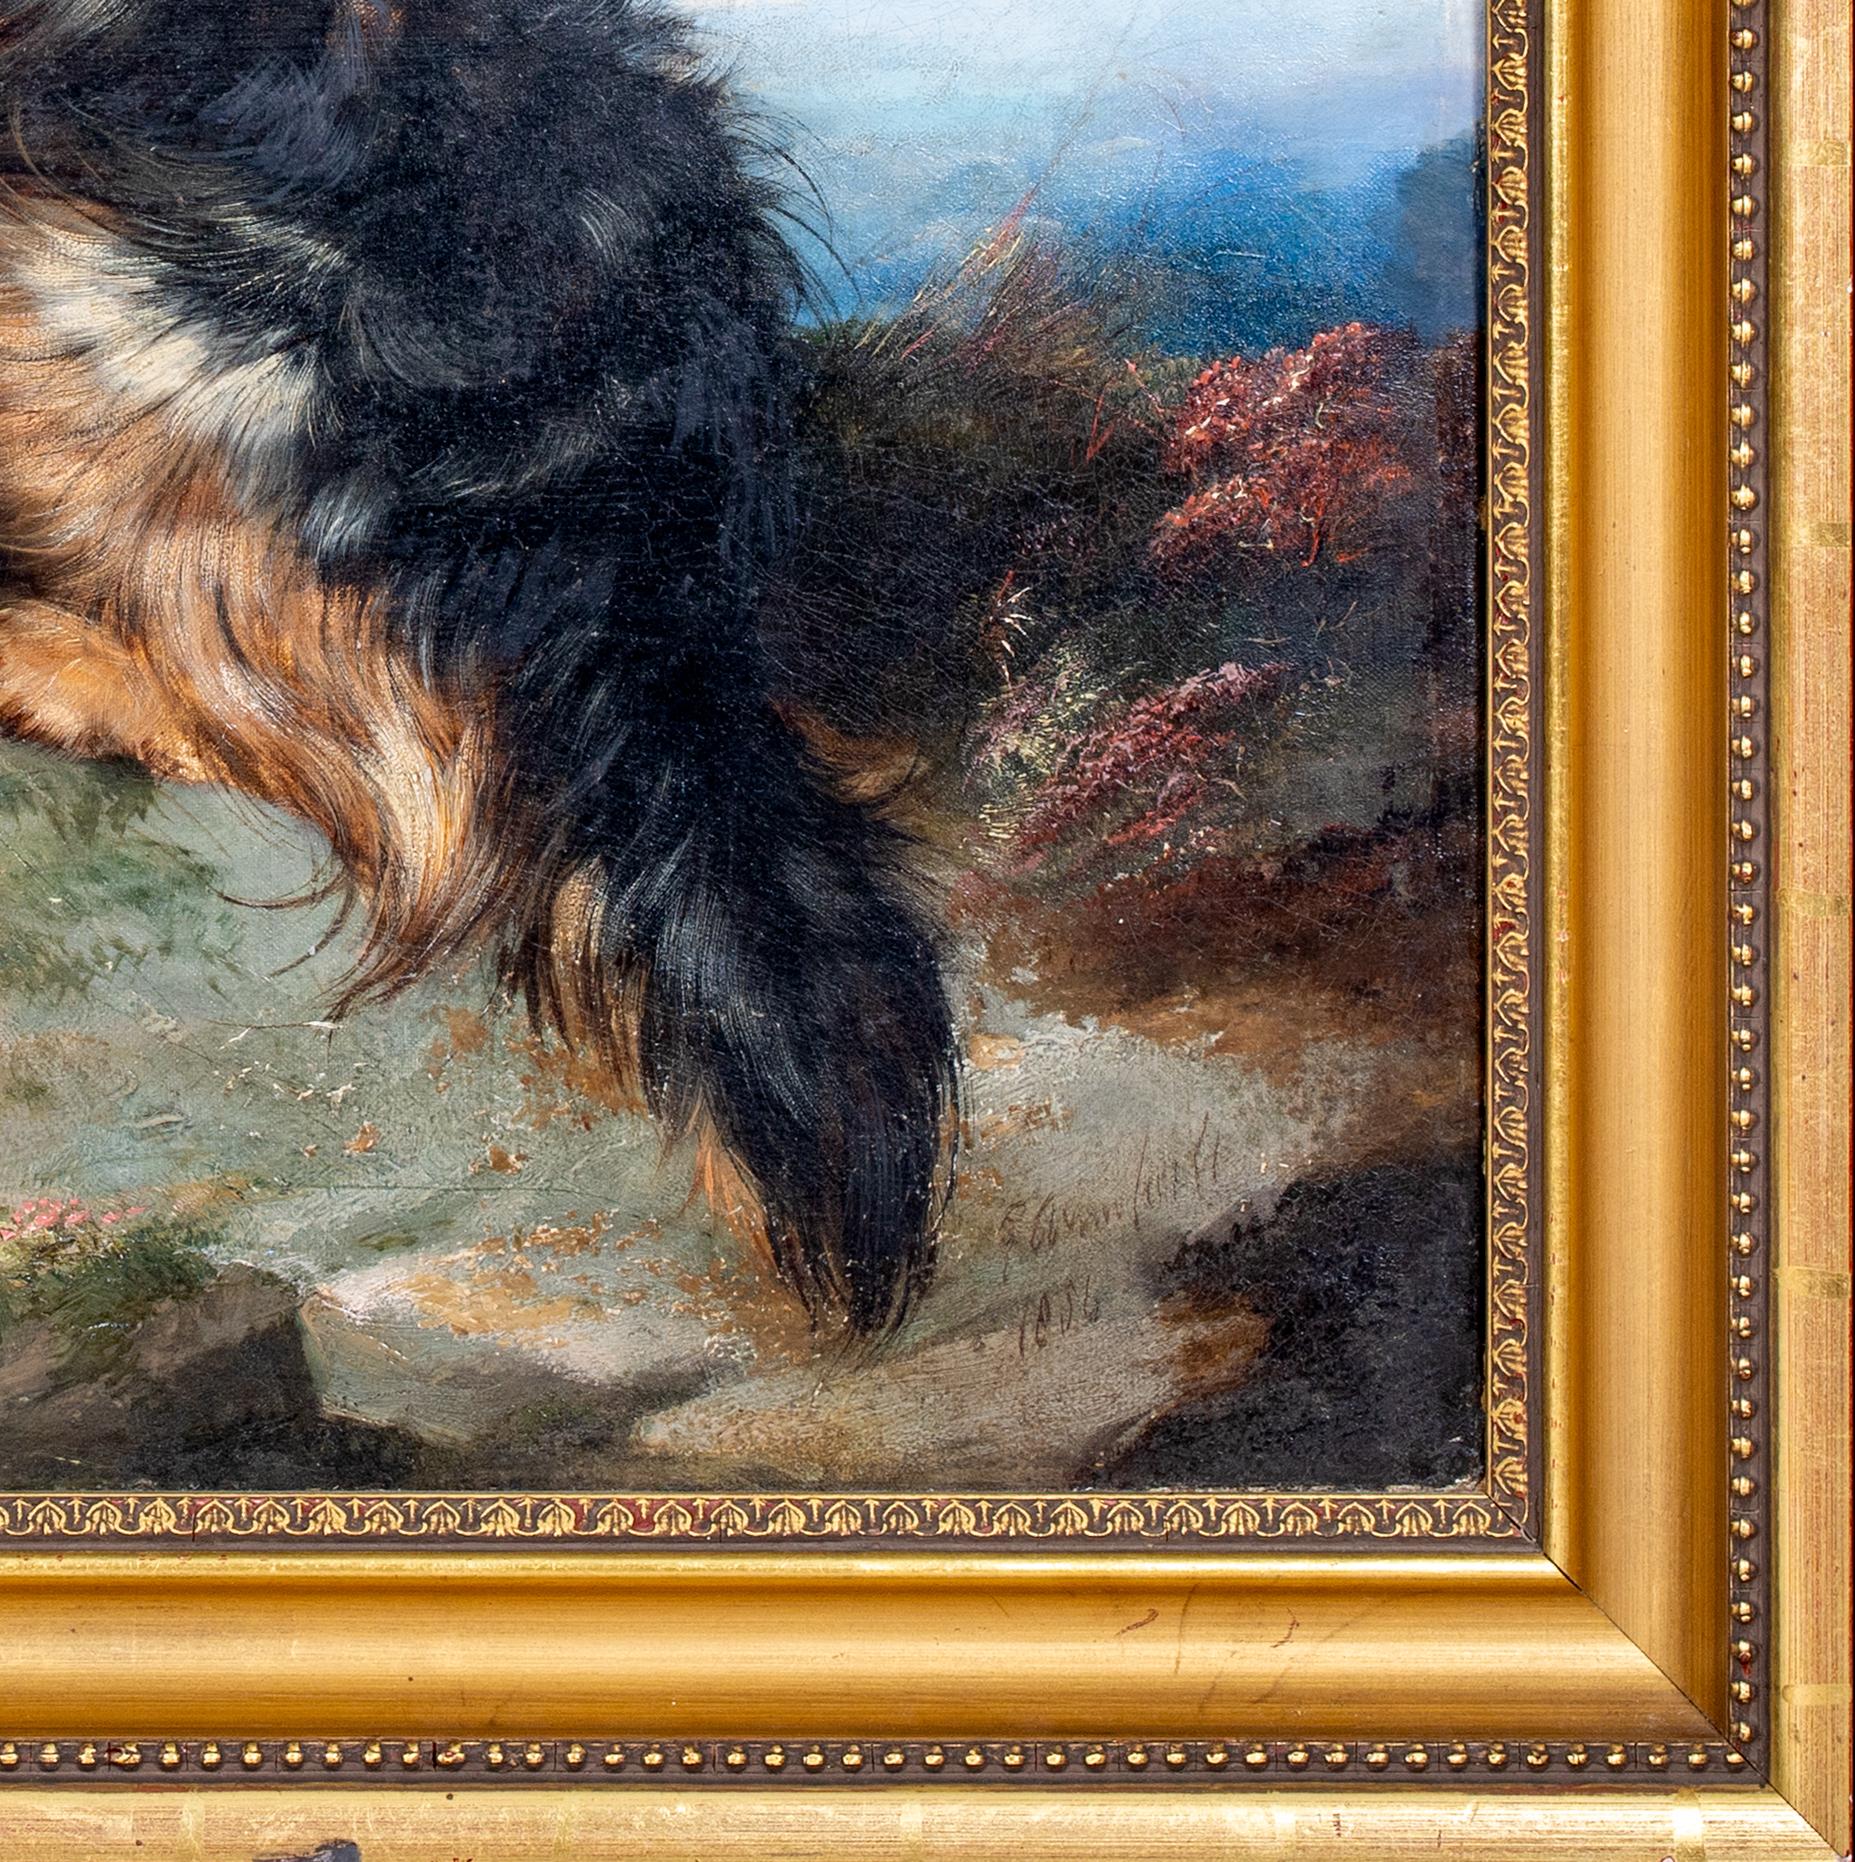 Portrait Of A Terrier, dated 1865

by George Armfield (1808-1893)

Large 19th Century portrait of a Terrier at a rabbit hole, oil on canvas by George Armfield. Excellent quality and condition example of the artists work rarely seen at this size.